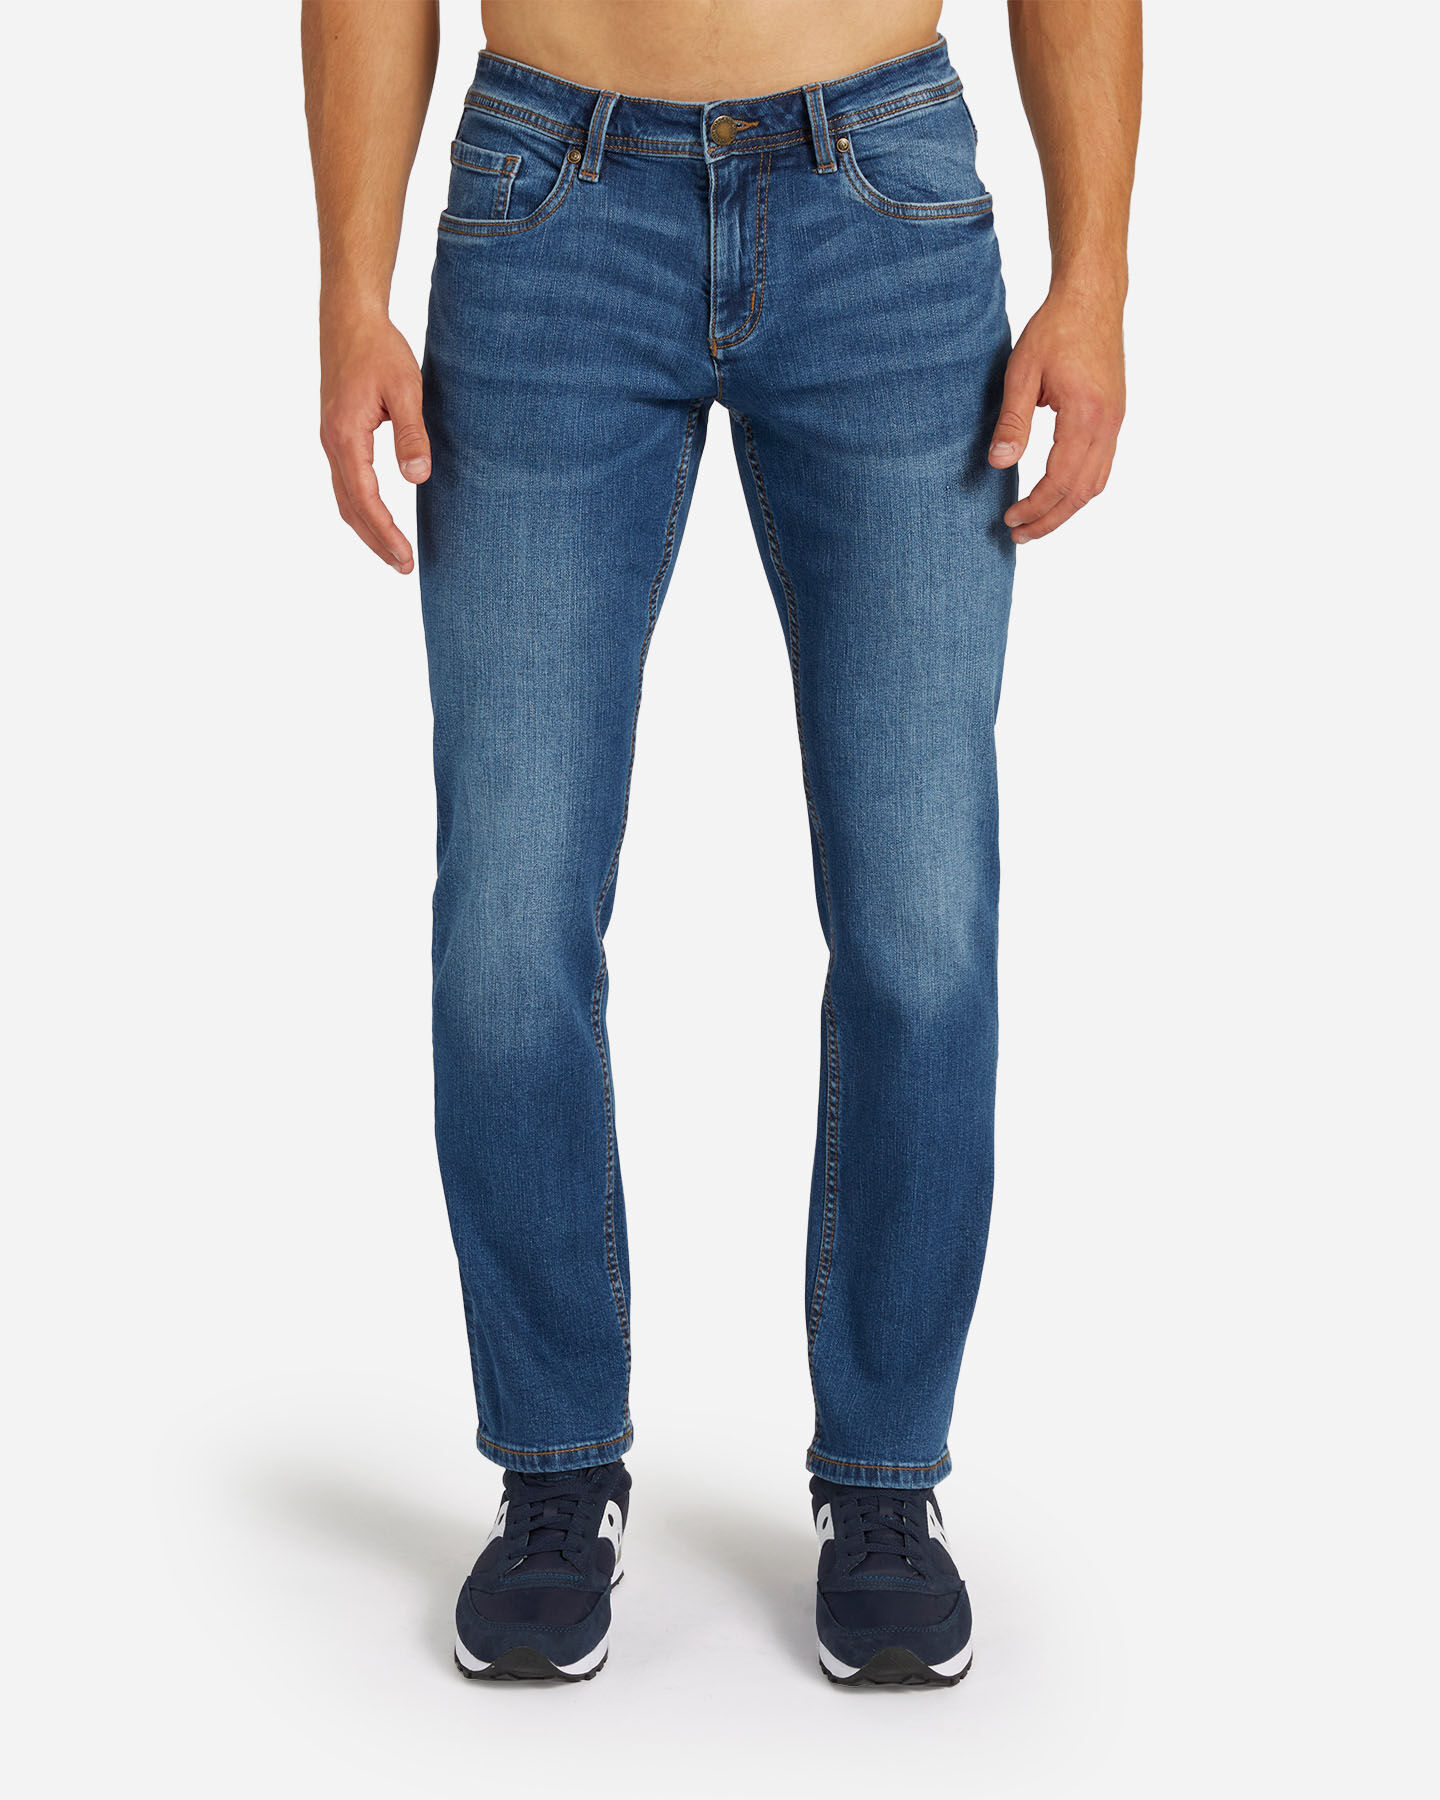  Jeans DACK'S CASUAL CITY M S4106781|MD|52 scatto 0